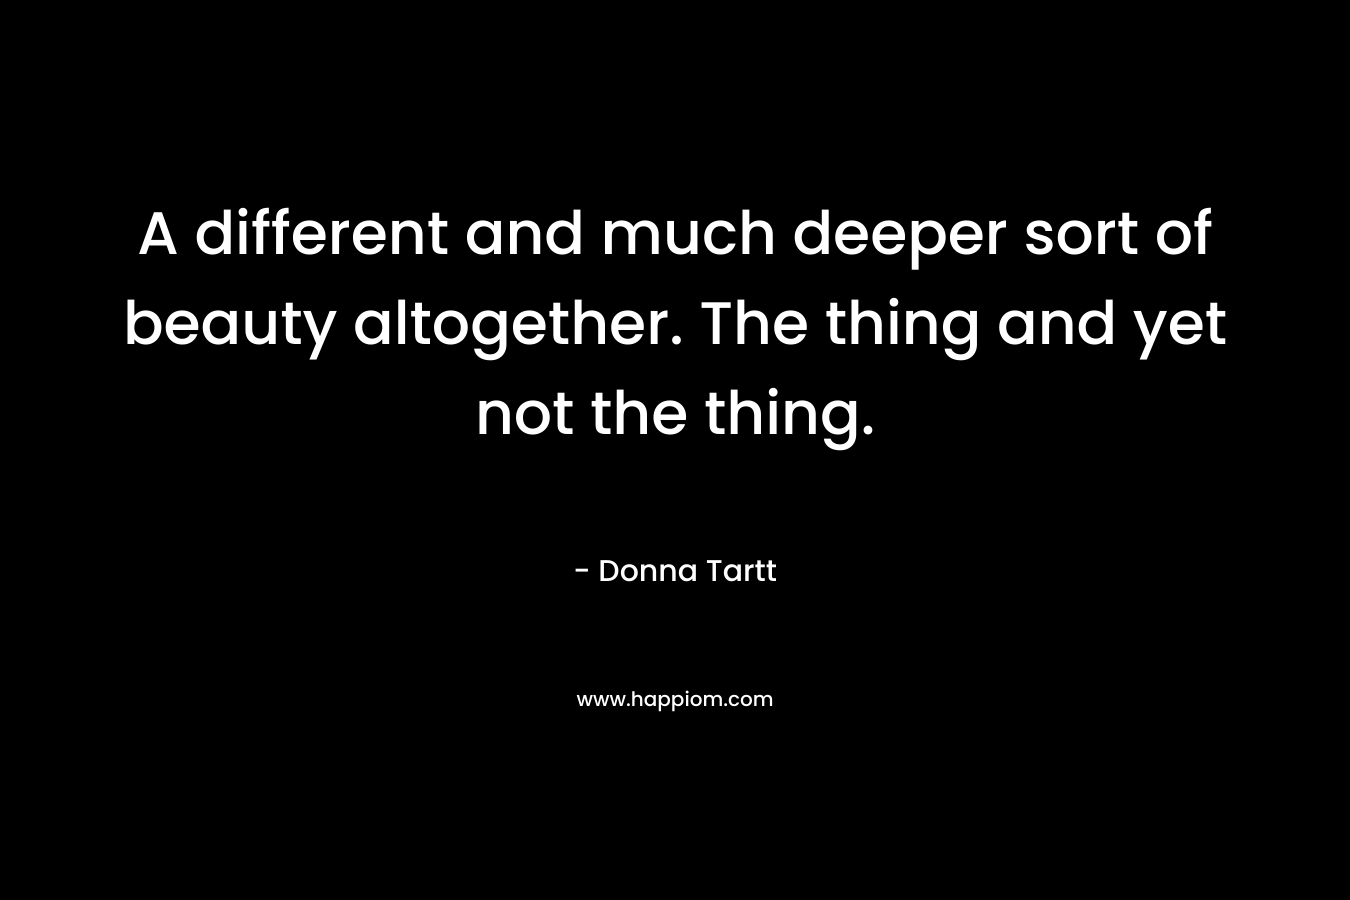 A different and much deeper sort of beauty altogether. The thing and yet not the thing.